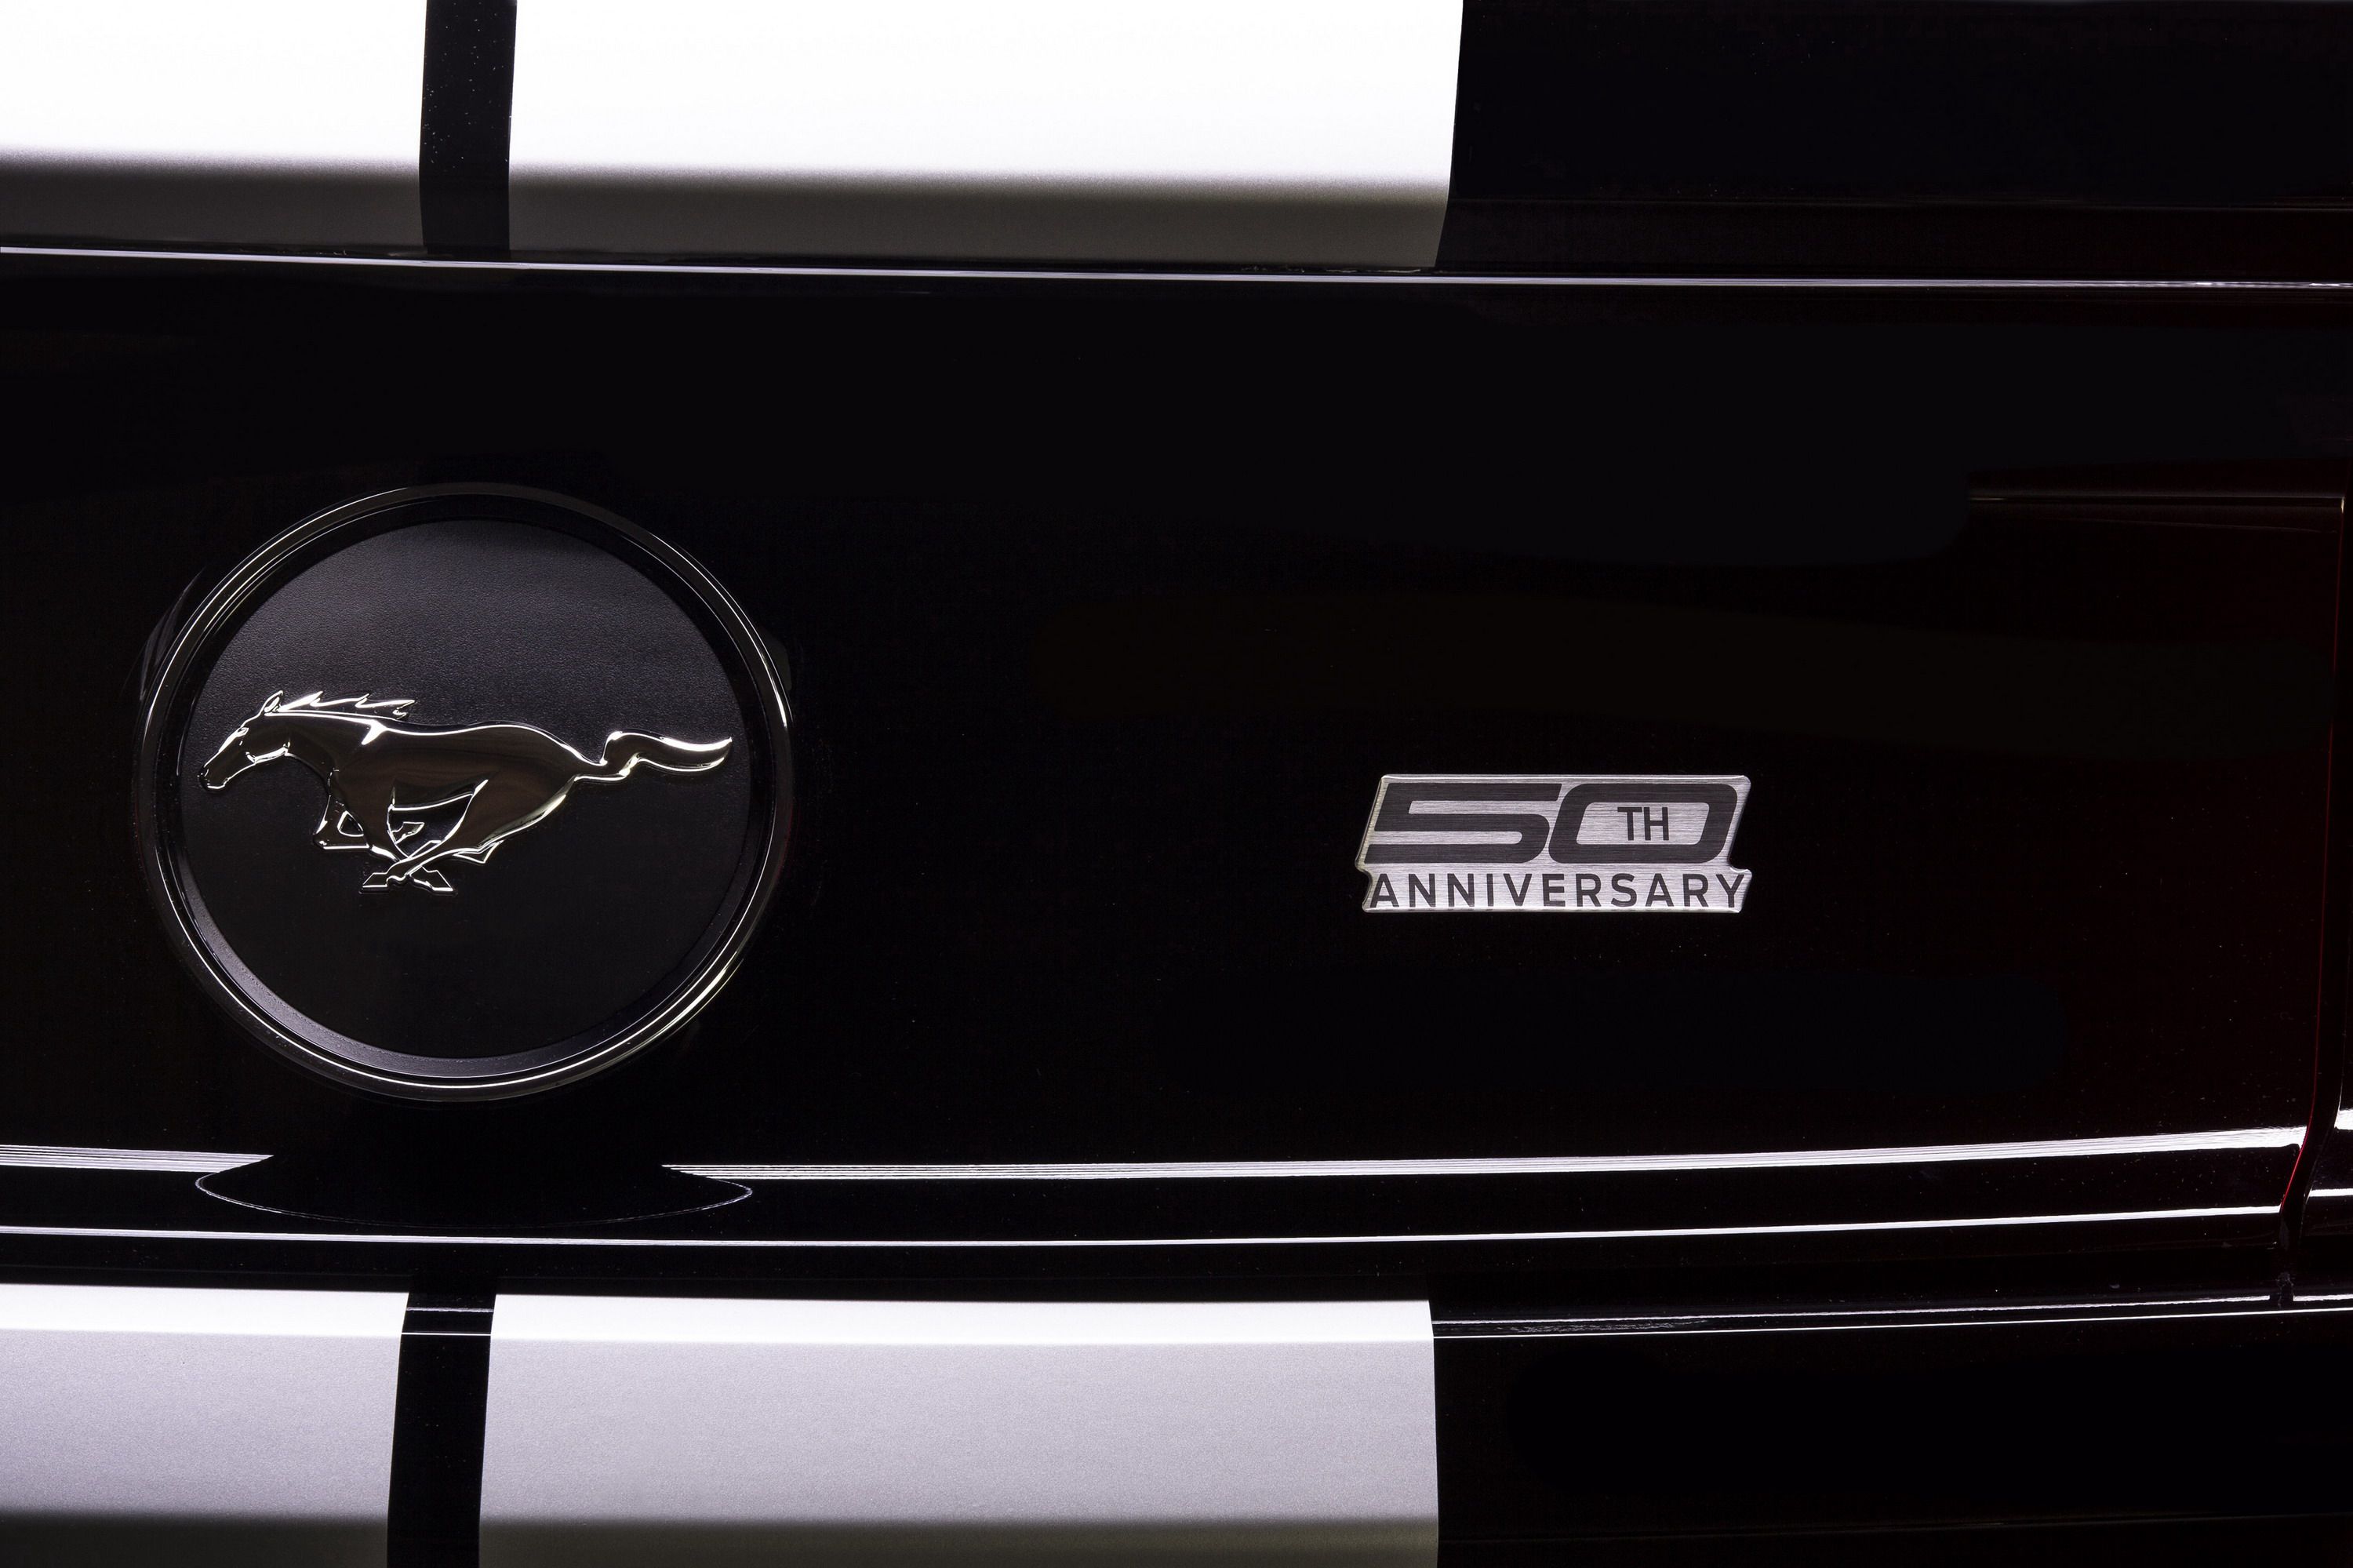 2016 Ford Mustang Le Mans 50th Anniversary Edition